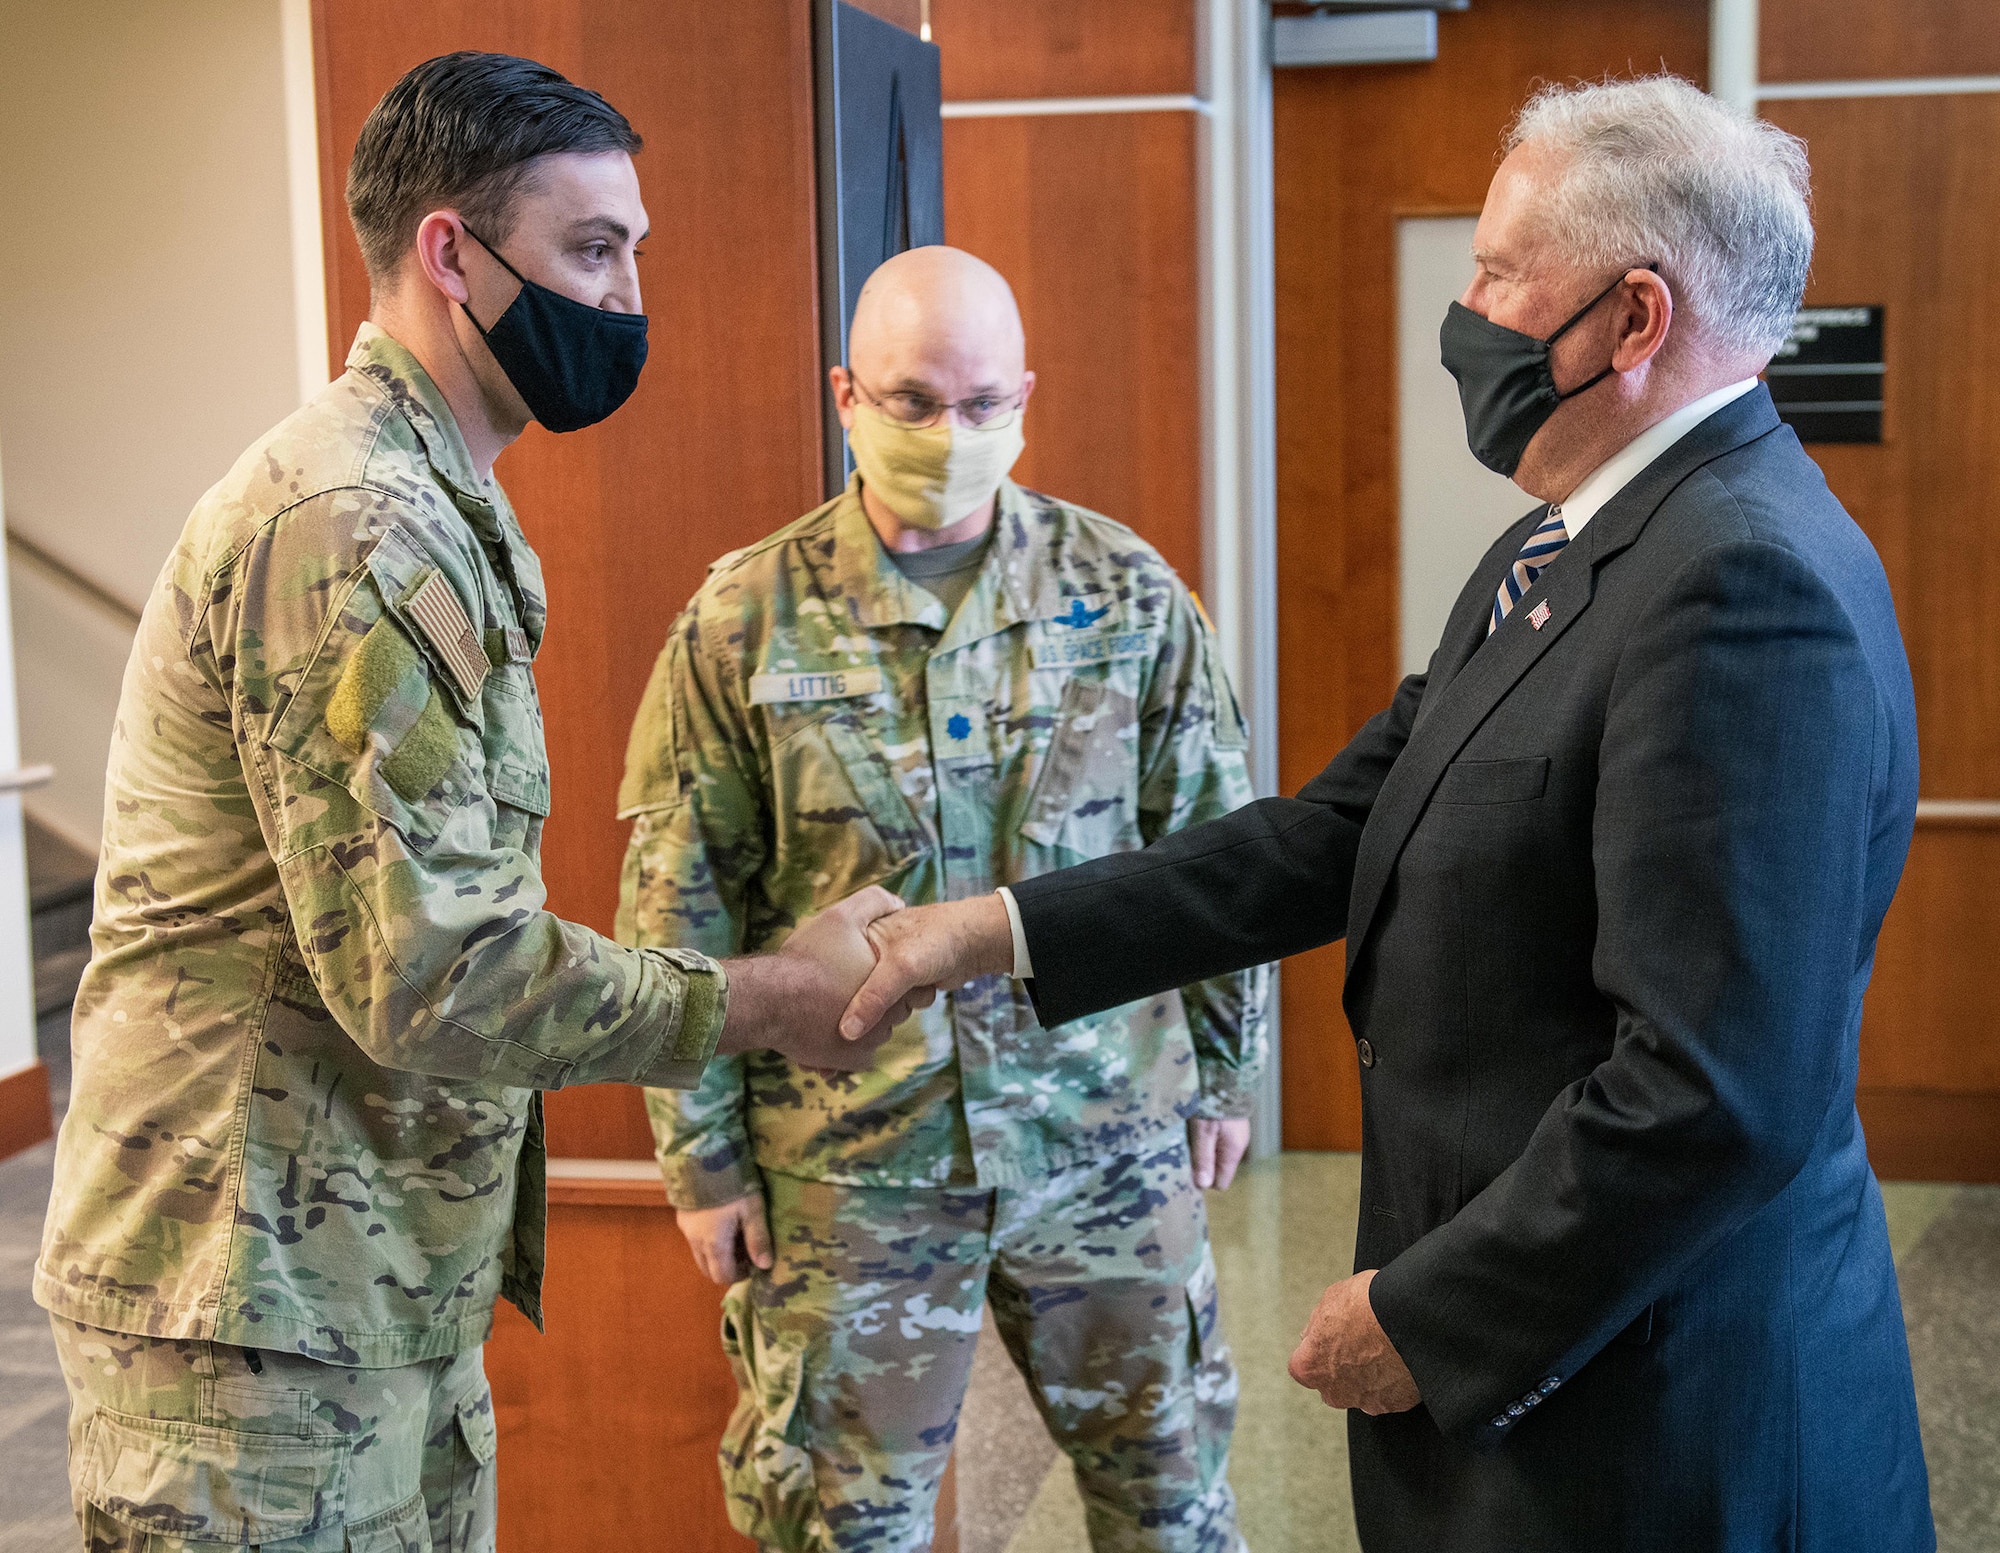 U.S. Air Force Staff Sgt. Trevor Schreckengost (left), the Buckley Garrison NCO in charge of occupational safety, receives a challenge coin from Secretary of the Air Force Frank Kendall, at the Buckley Garrison headquarters building on Buckley Space Force Base, Colo., Aug. 23, 2021.